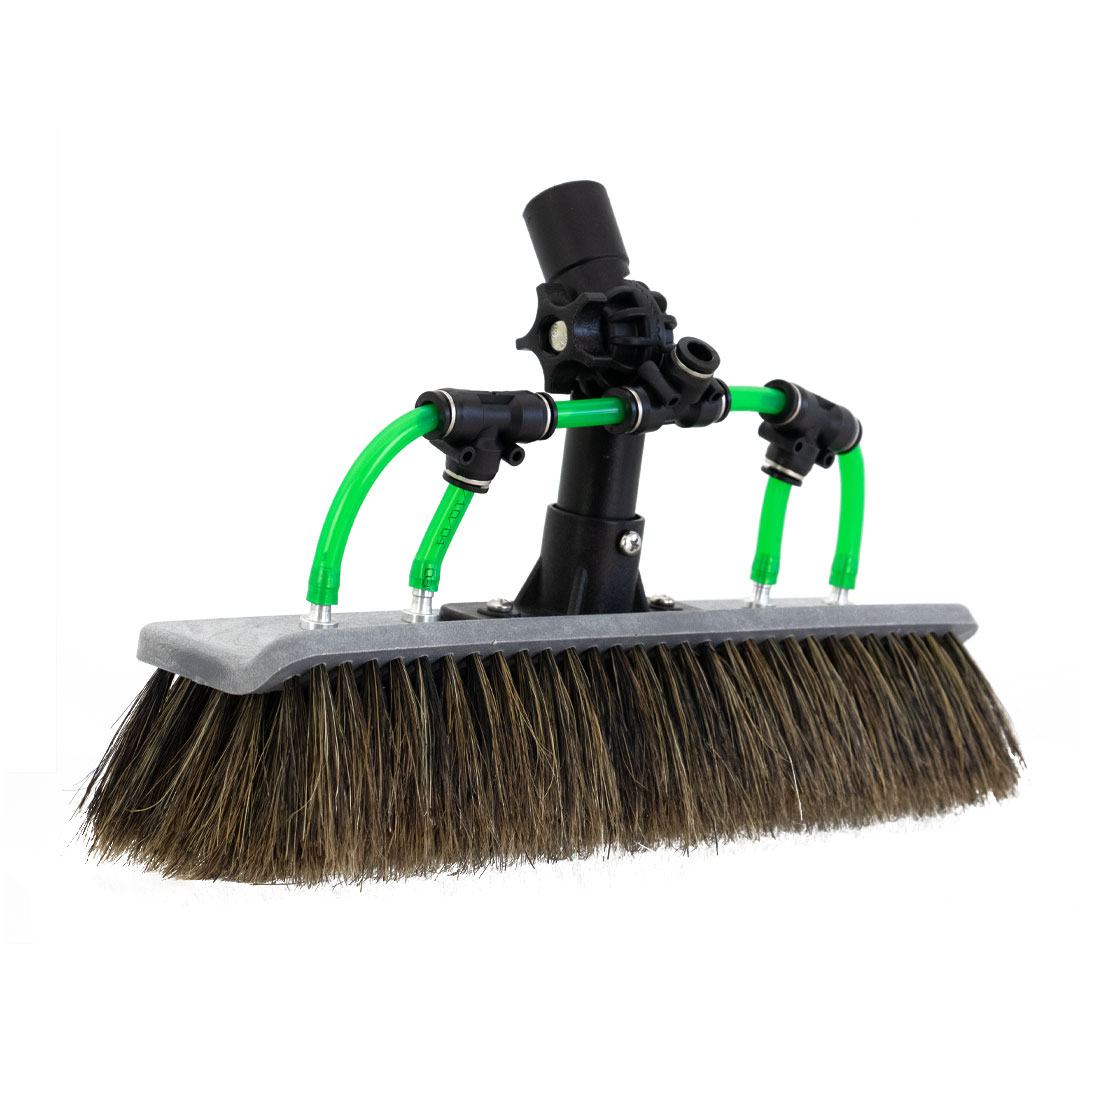 IPC 14 Speed Brush, Waterfed Brushes, Window Cleaning Supplies & Tools